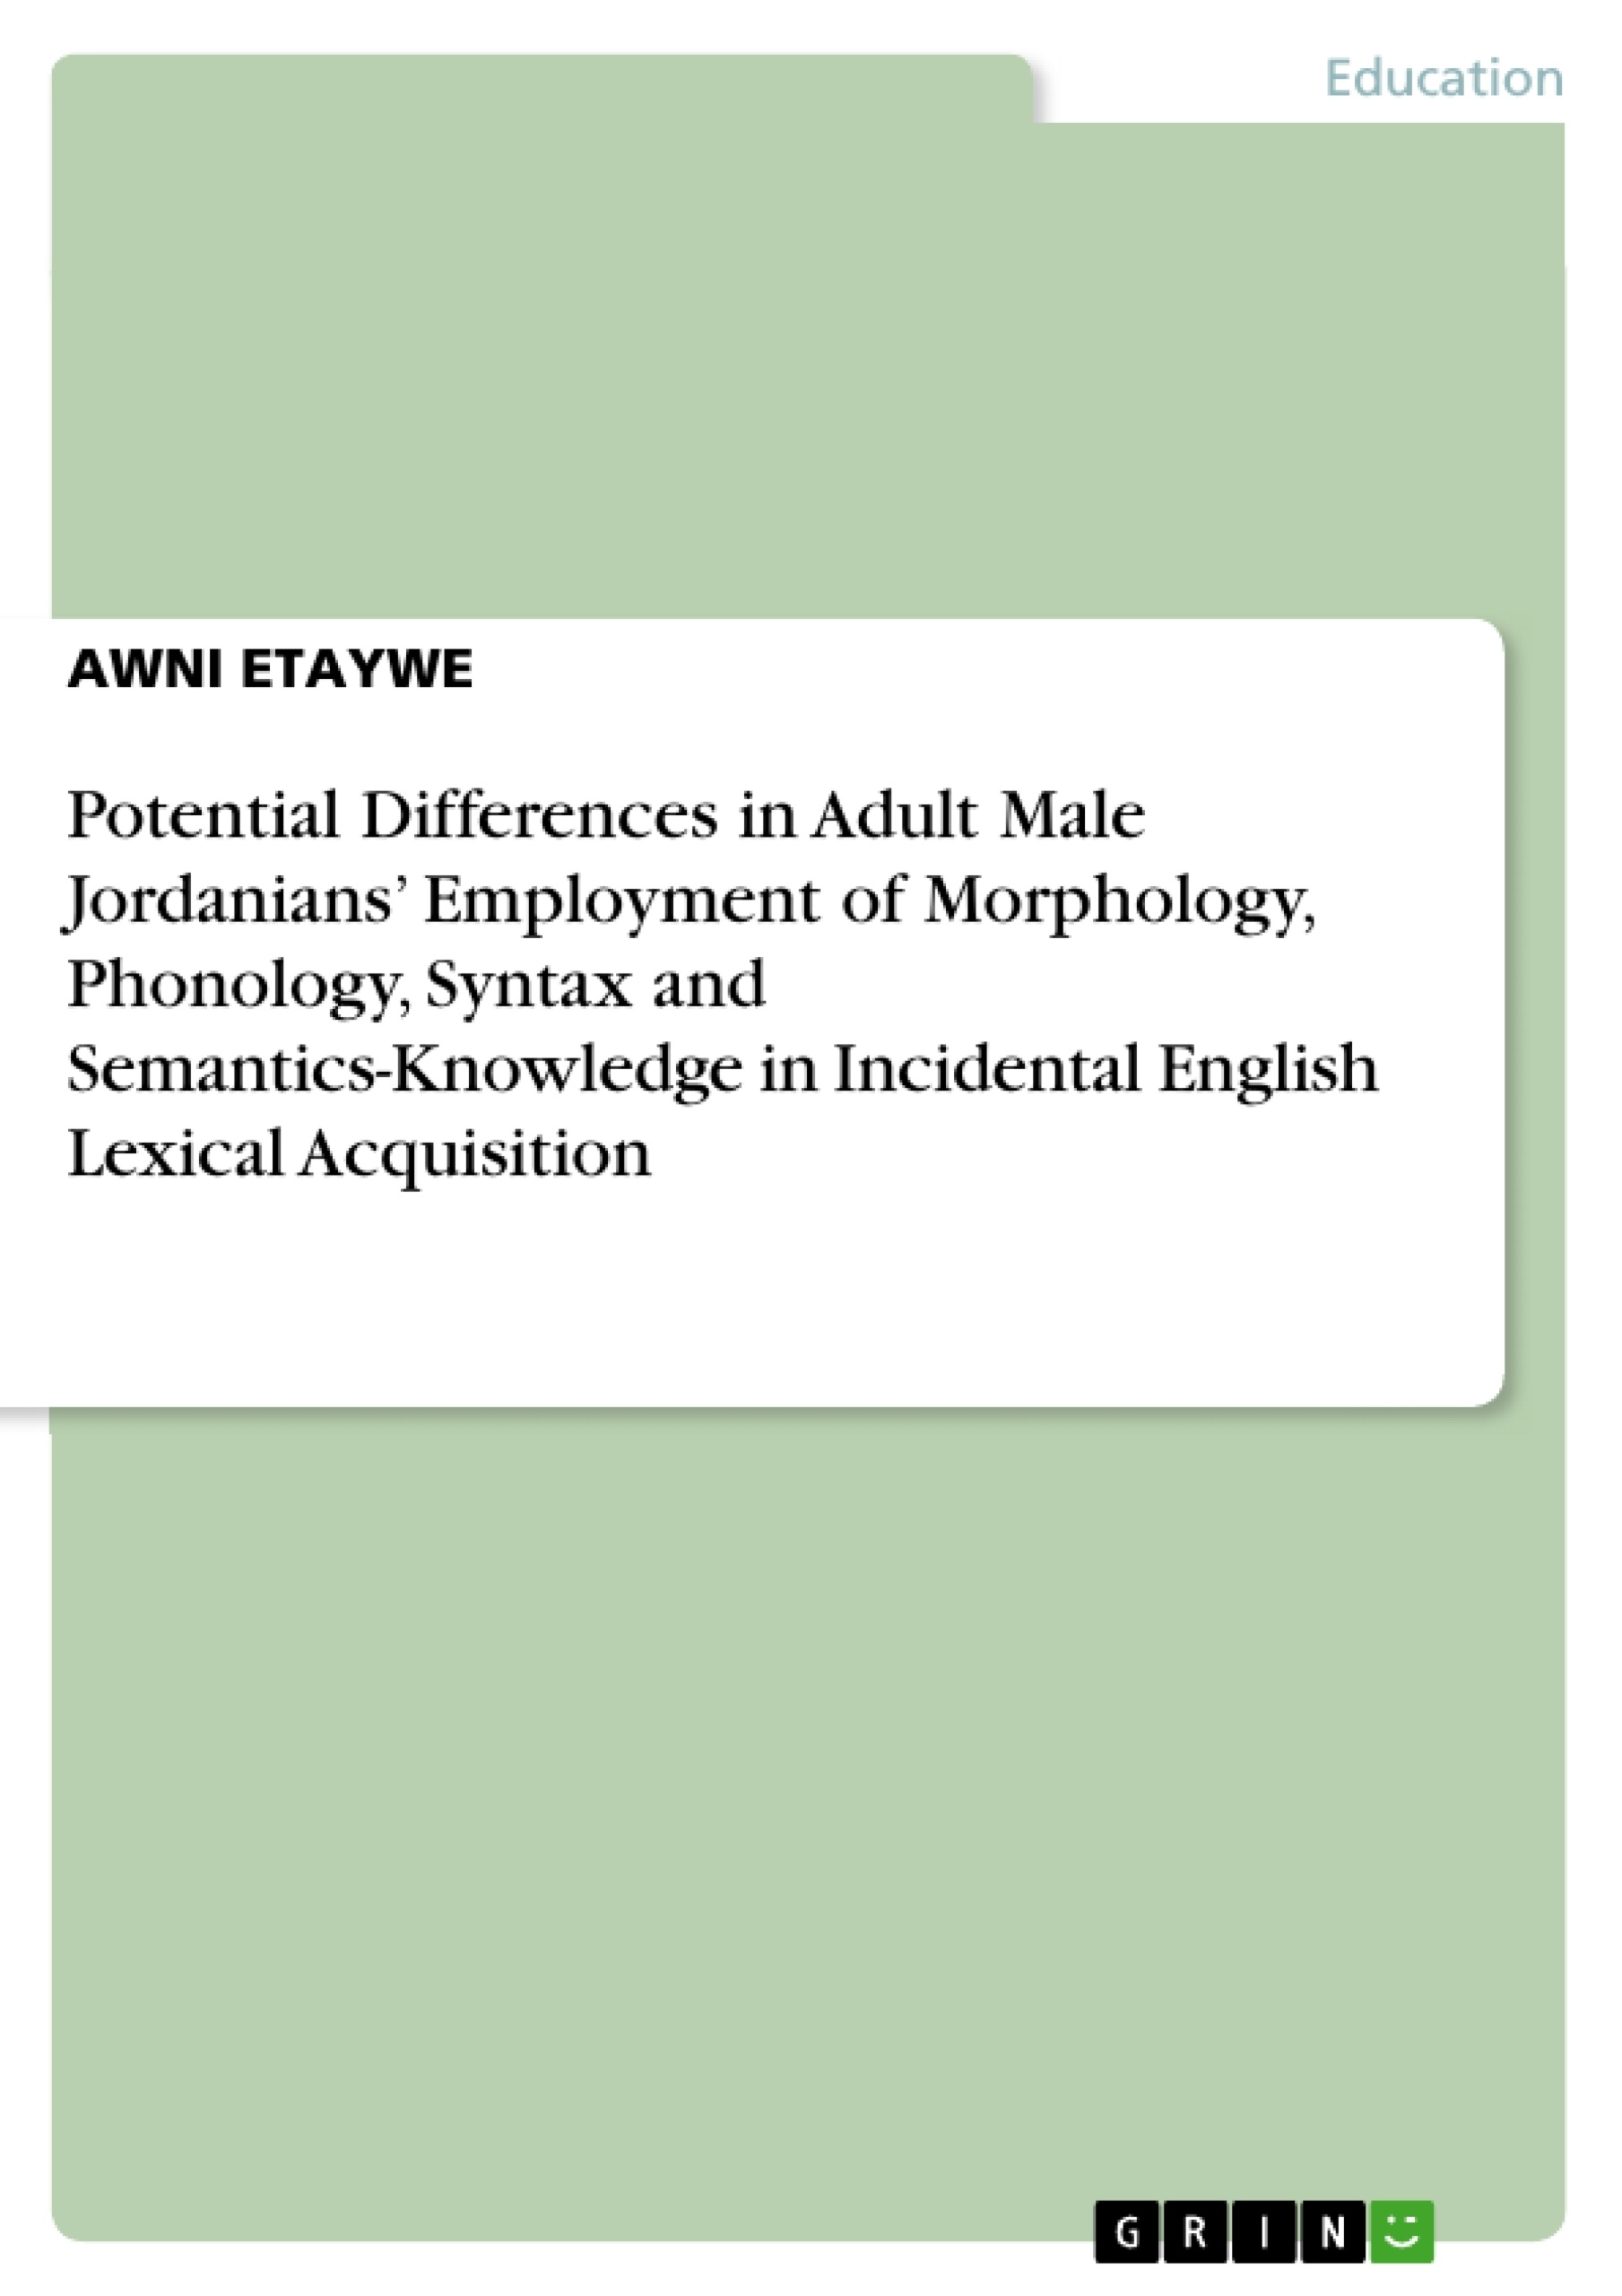 Title: Potential Differences in Adult Male Jordanians’ Employment of Morphology, Phonology, Syntax and Semantics-Knowledge in Incidental English Lexical Acquisition